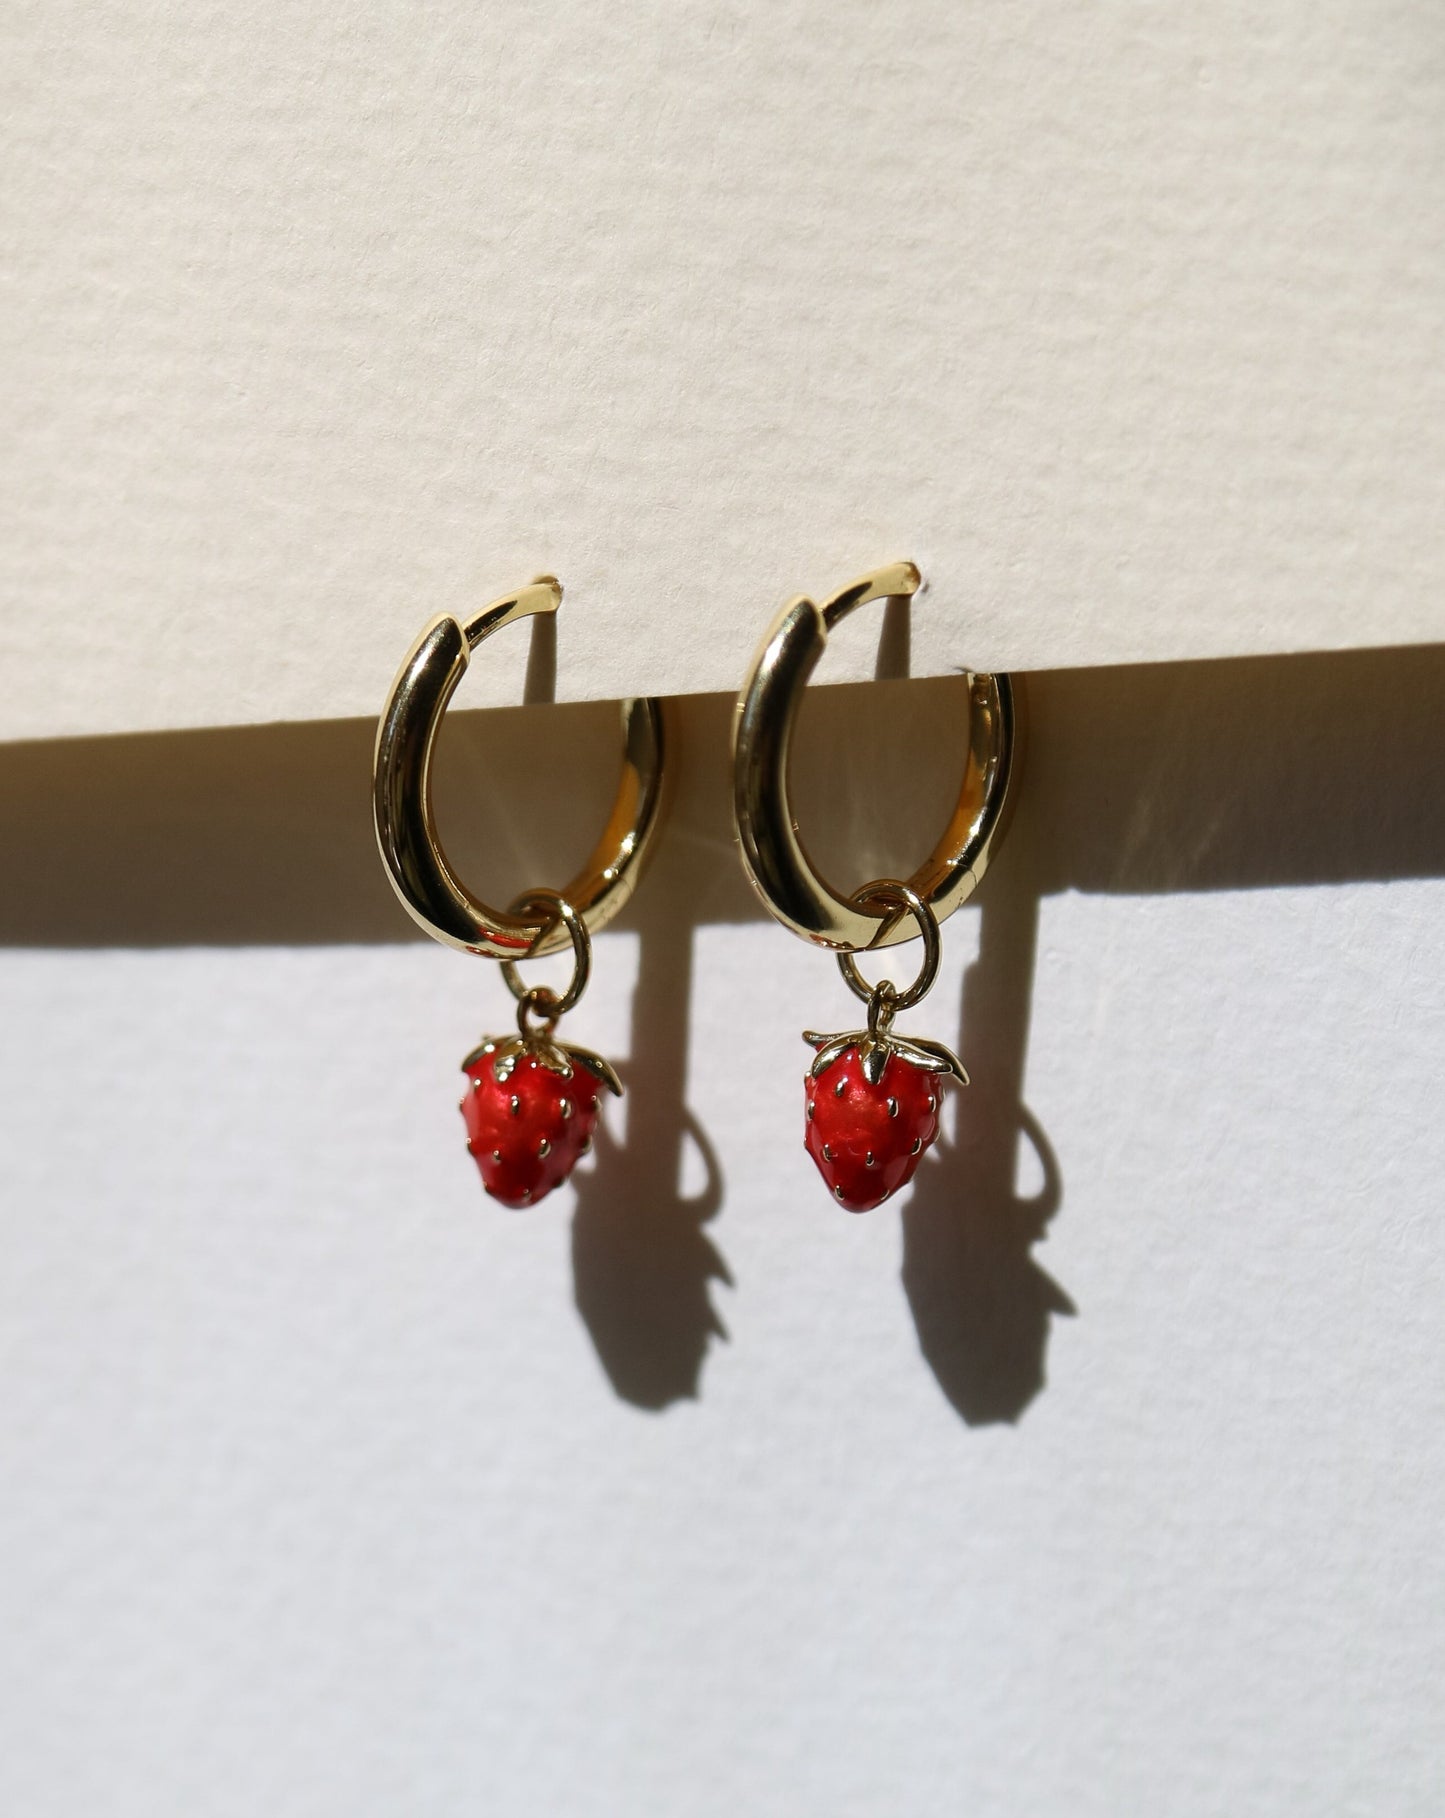 Strawberry charms for earrings